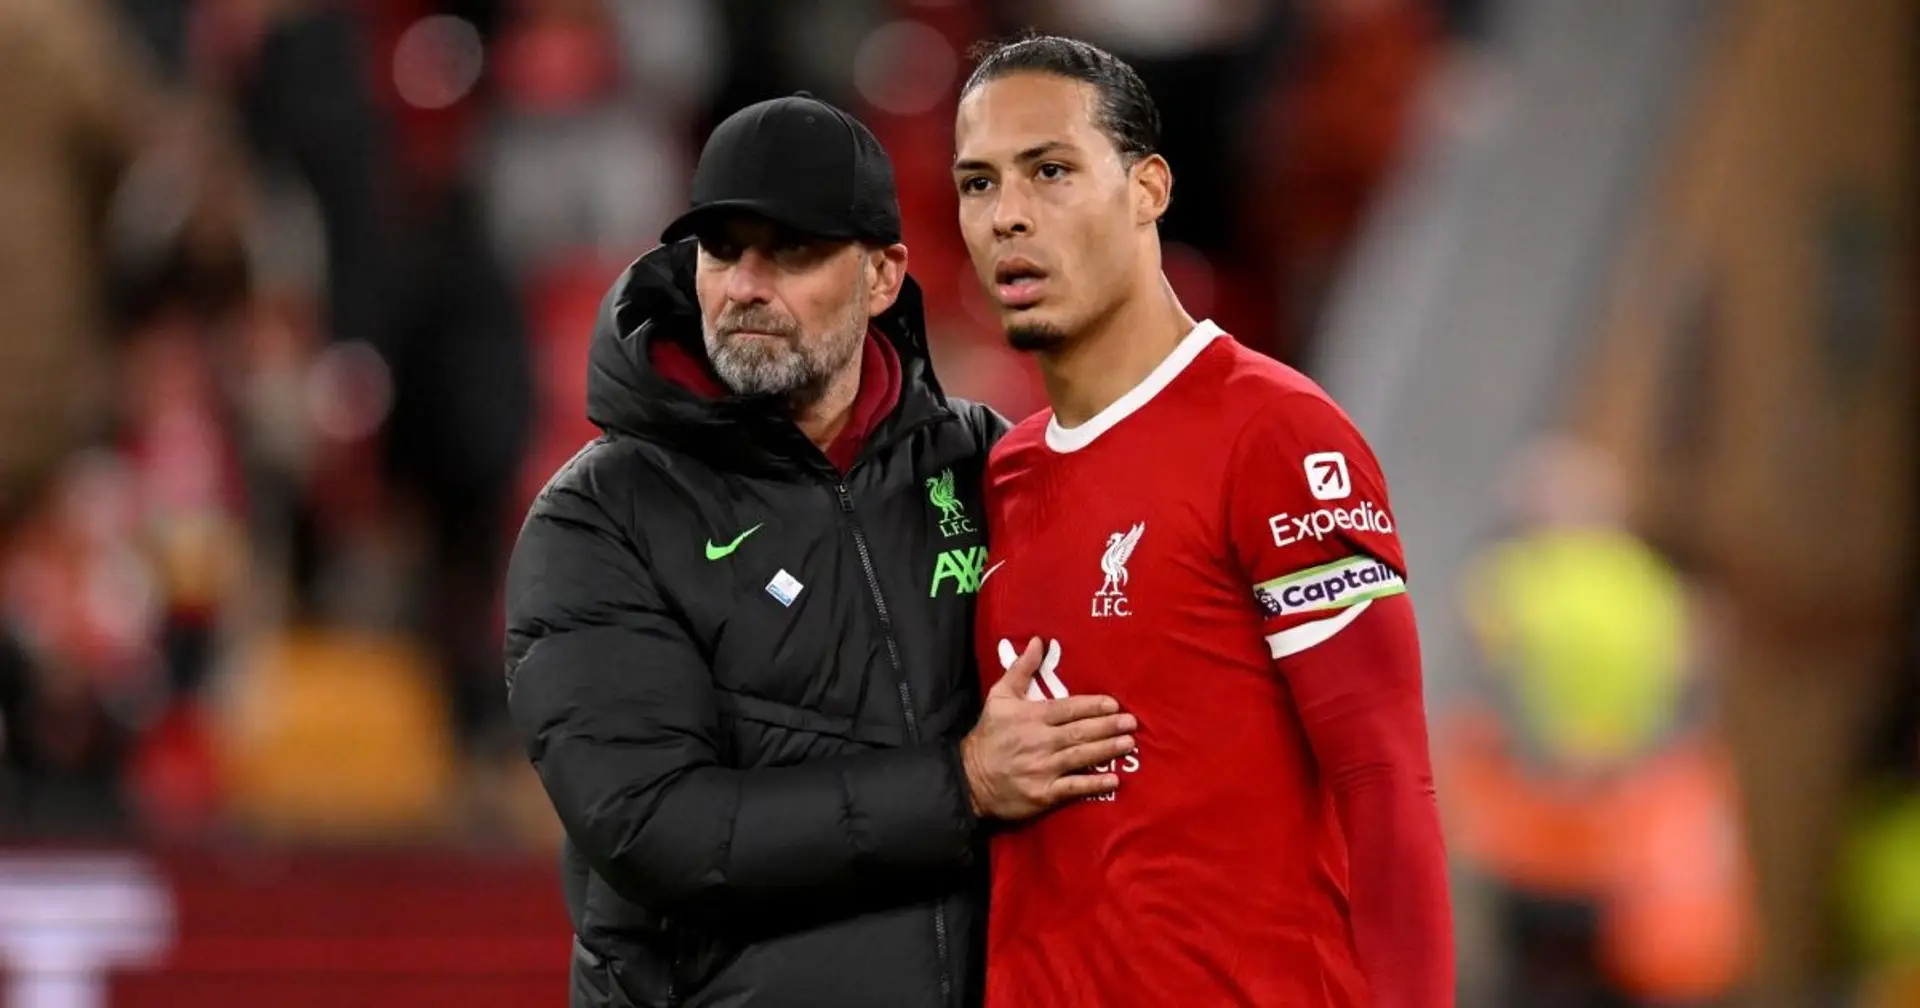 Klopp and Van Dijk up for big Premier League awards and 2 more big stories you may have missed